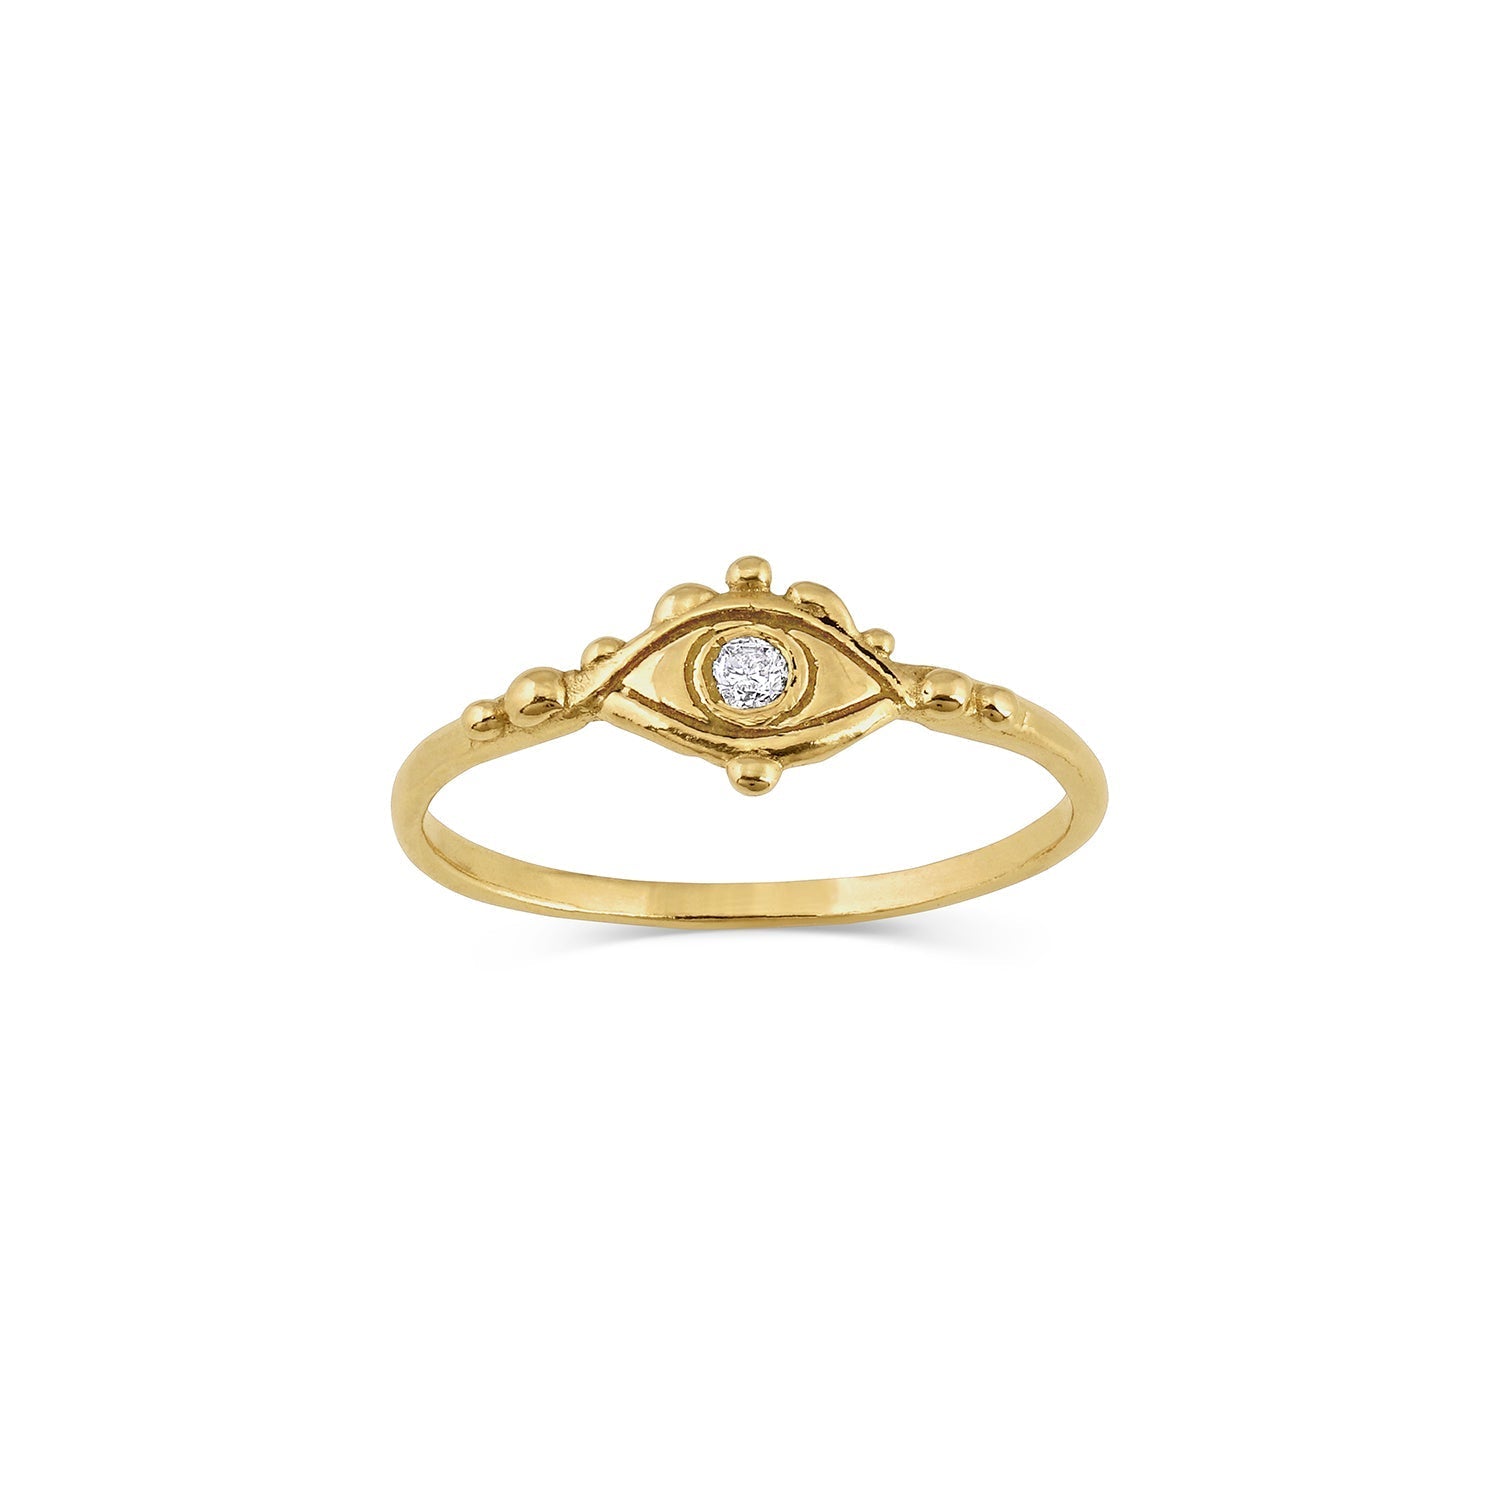 This Third Eye Diamond ring is created as a Fine Talisman to align you with your highest self, a third eye diamond, a 14k gold eye stacking ring. 12th HOUSE | Mystical Fine Jewelry | Talisman | Moon phase Rings | Celestial Zodiac